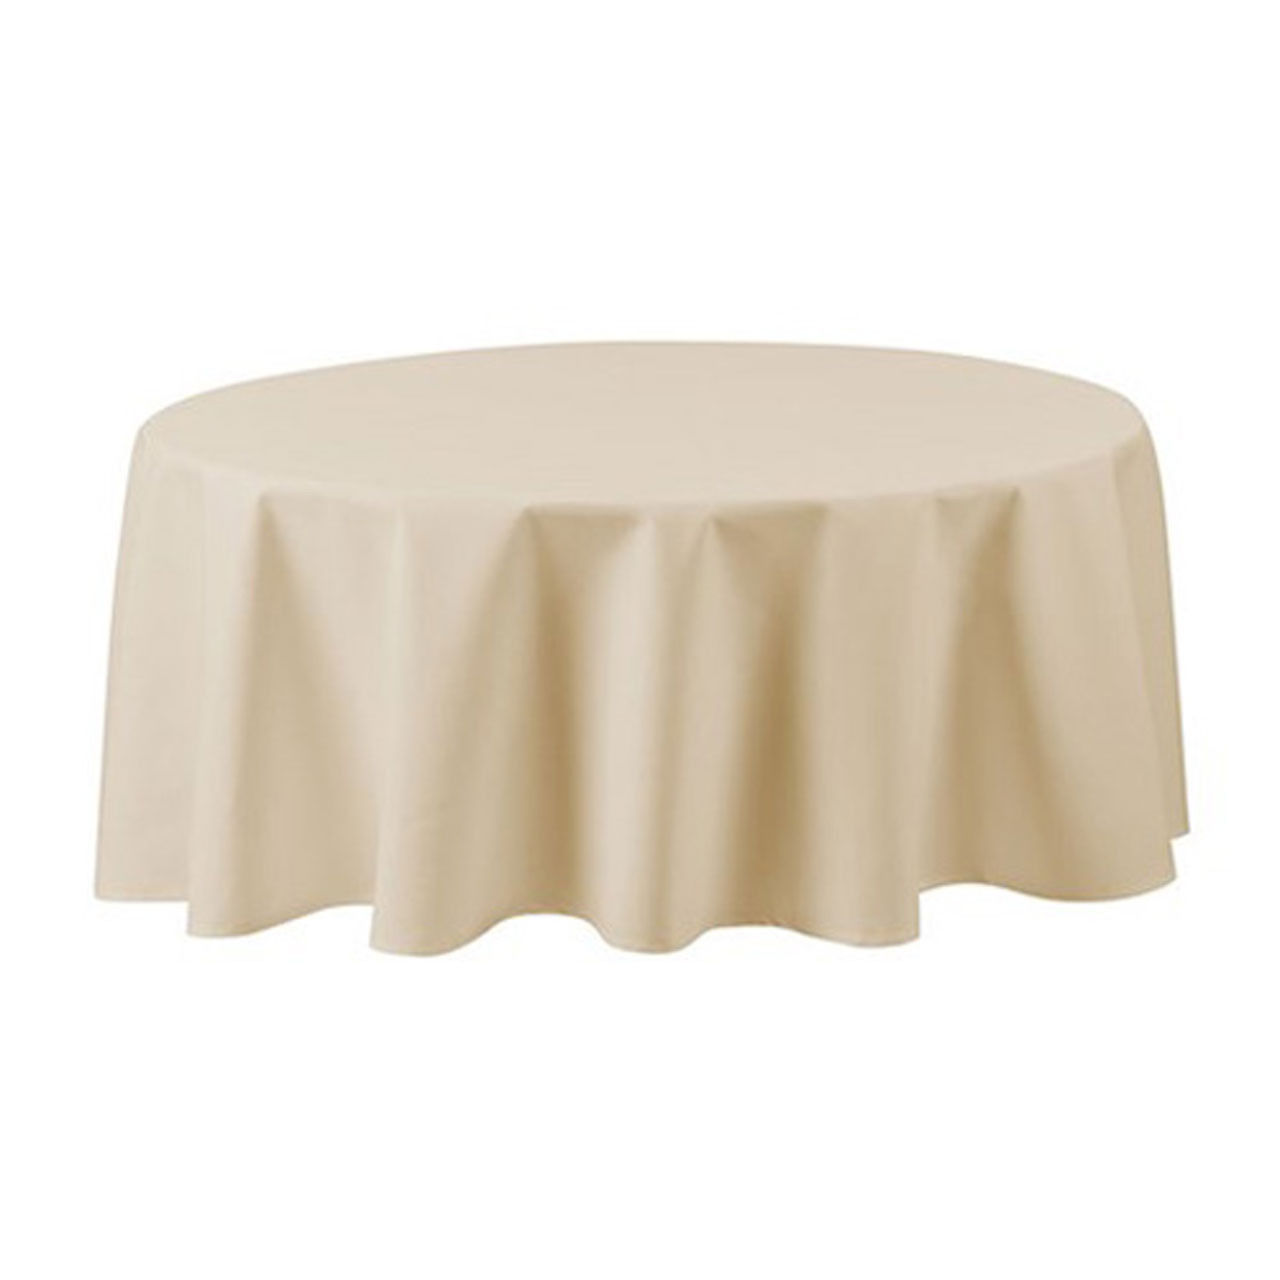 What are the key features of the Seamless Ivory 120 Inch Round Tablecloth?